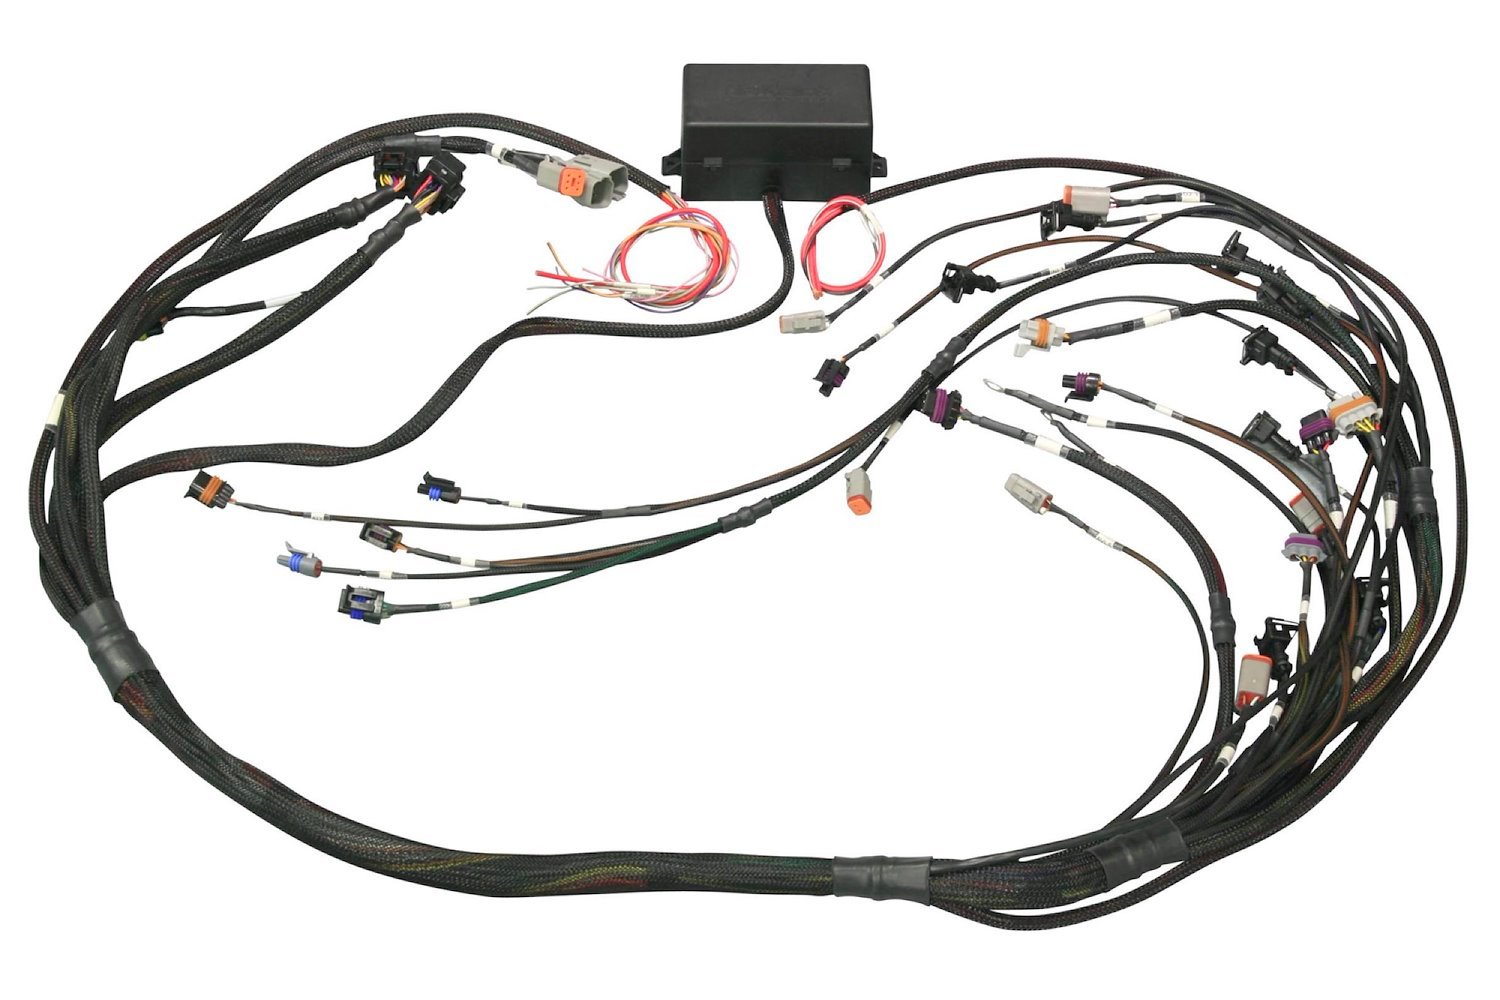 HT-045504 6 Channel Flying Lead Ignition Harness